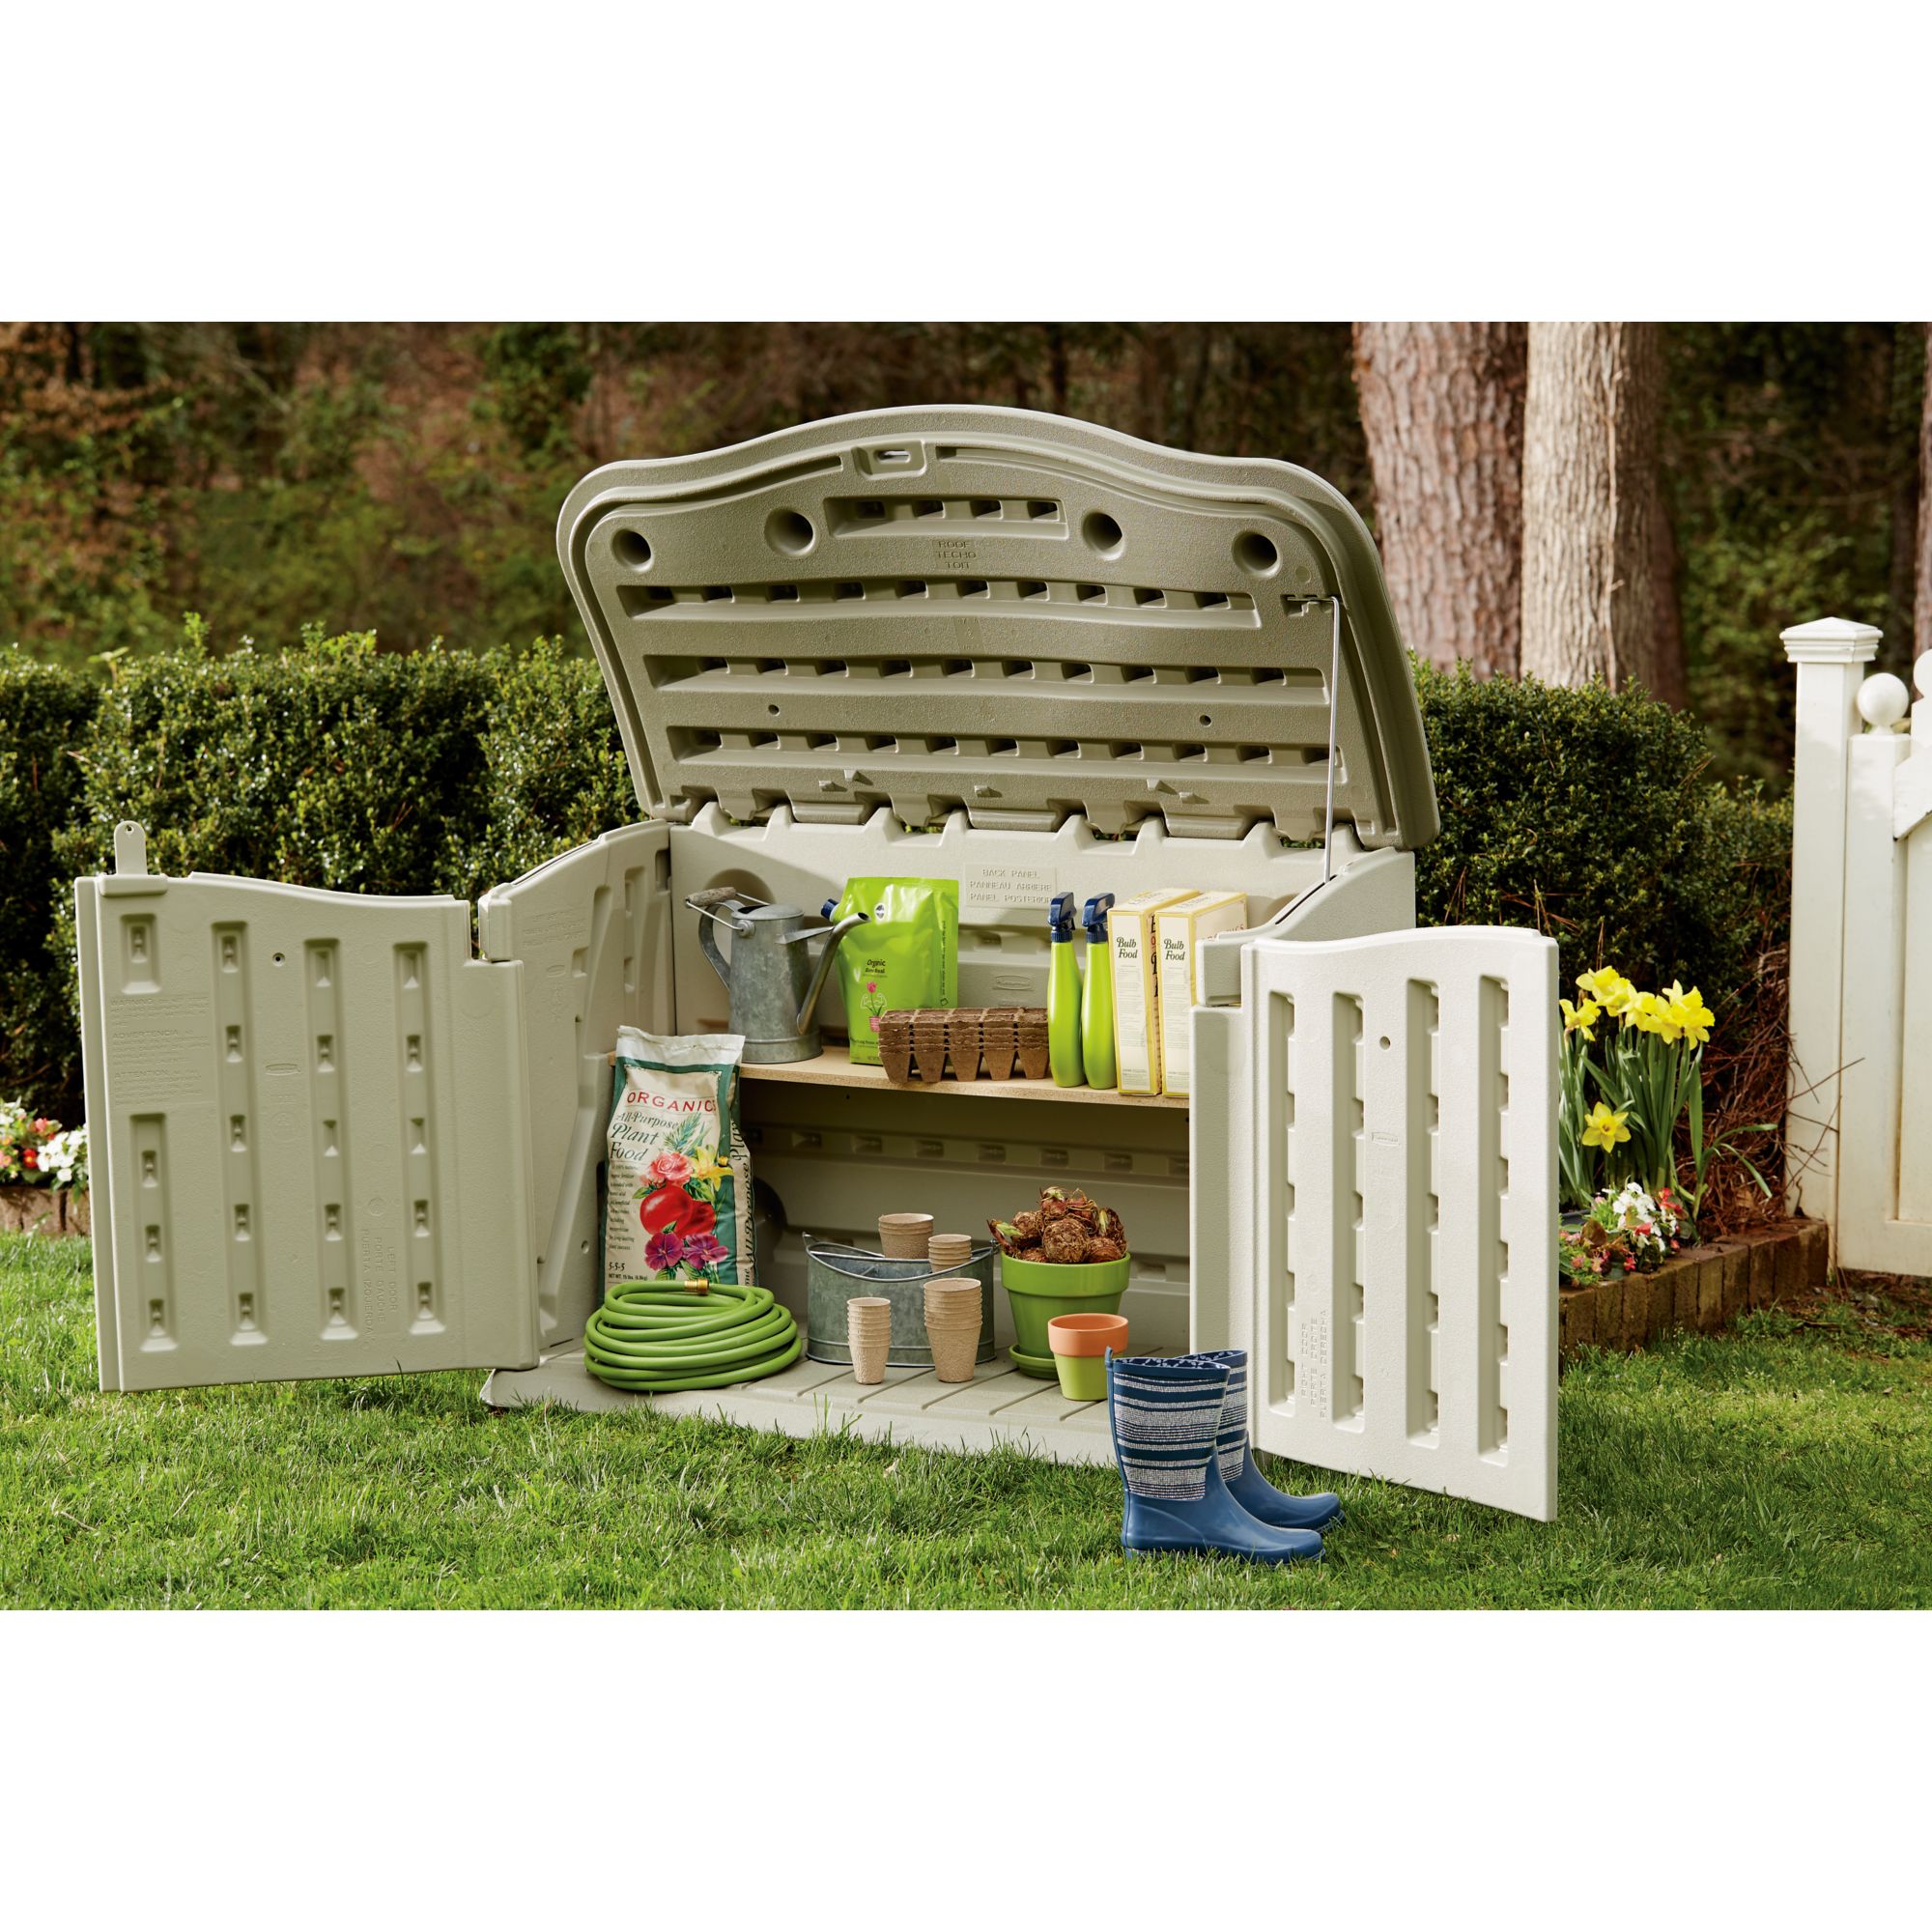 Rubbermaid 5 ft. x 2 ft. 2 in. x 2 ft. 4 in. x L Deck Box with Seat  Rubbermaid  outdoor storage, Deck box storage, Outdoor storage bench